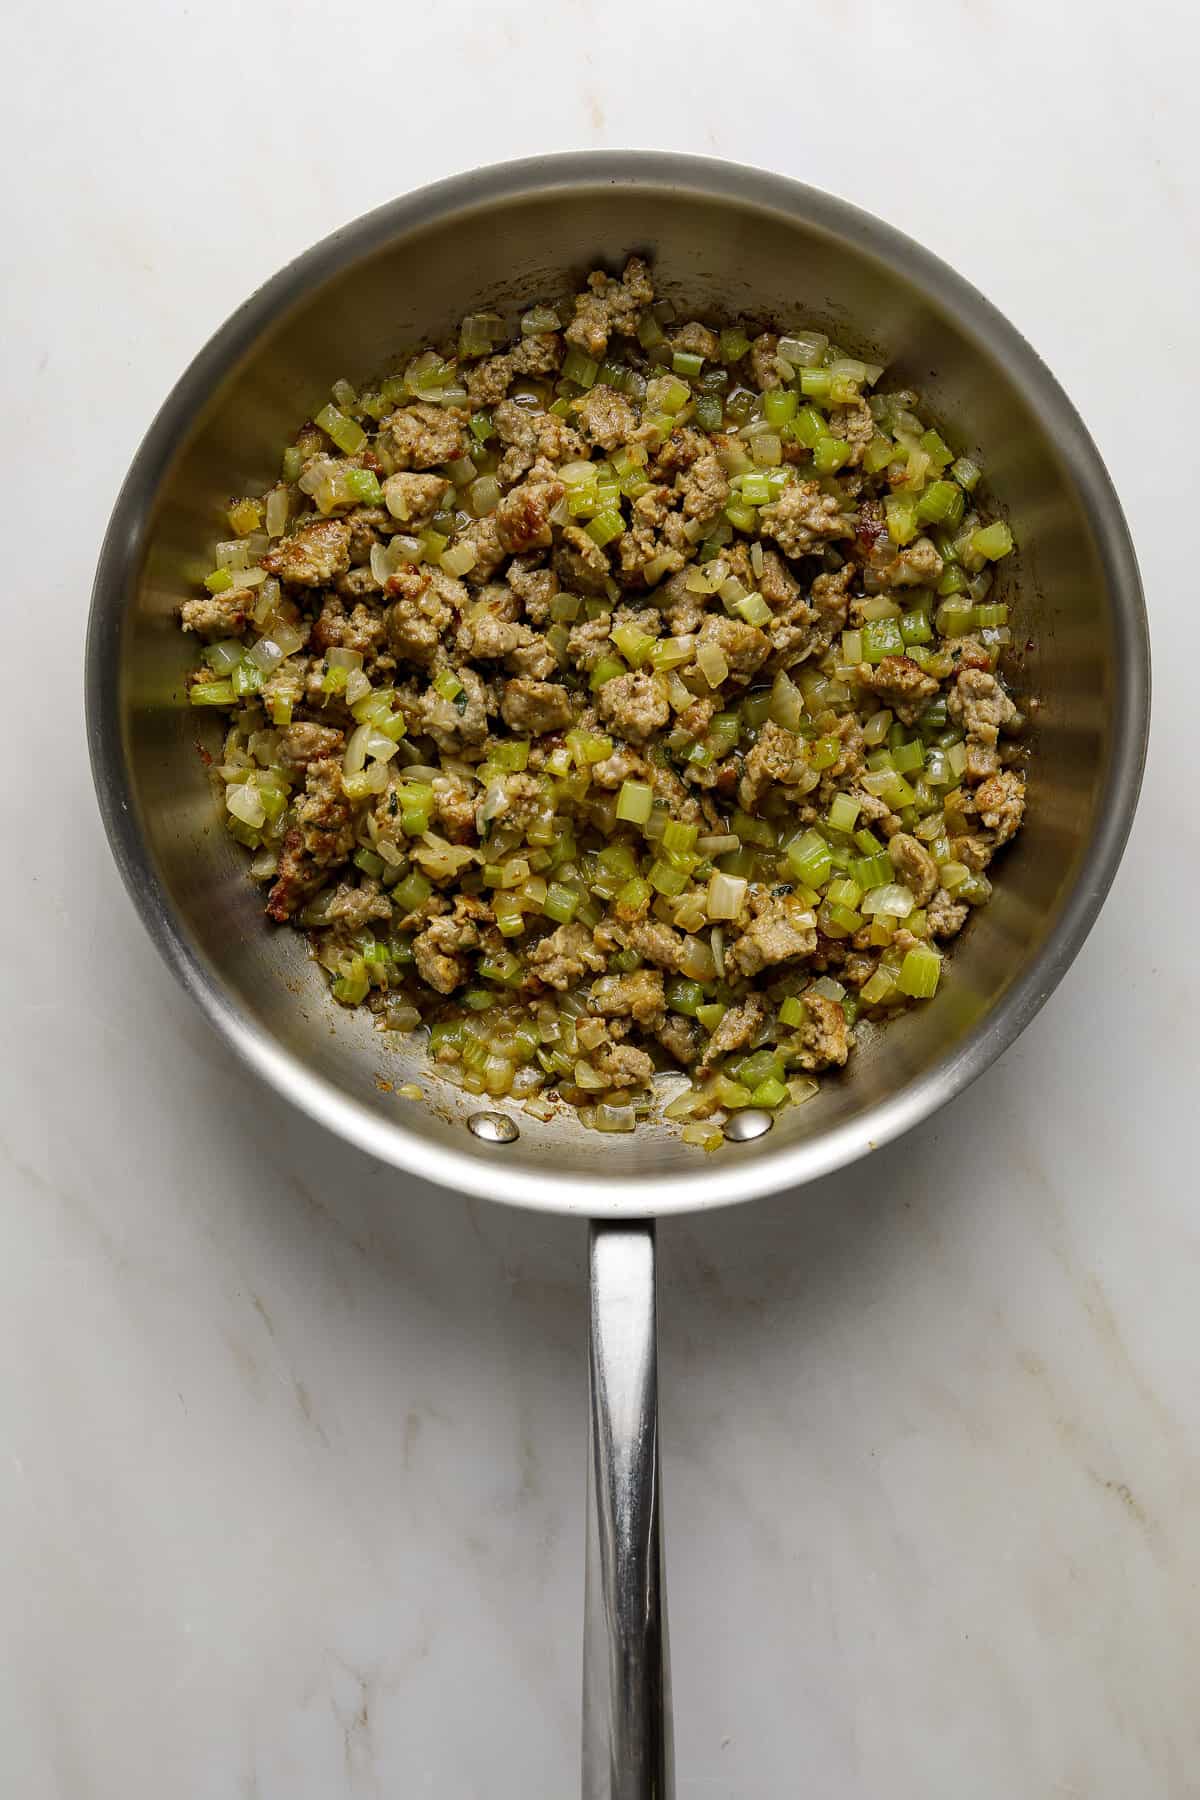 A stainless steel sauté pan filled with sausage, celery and onions.